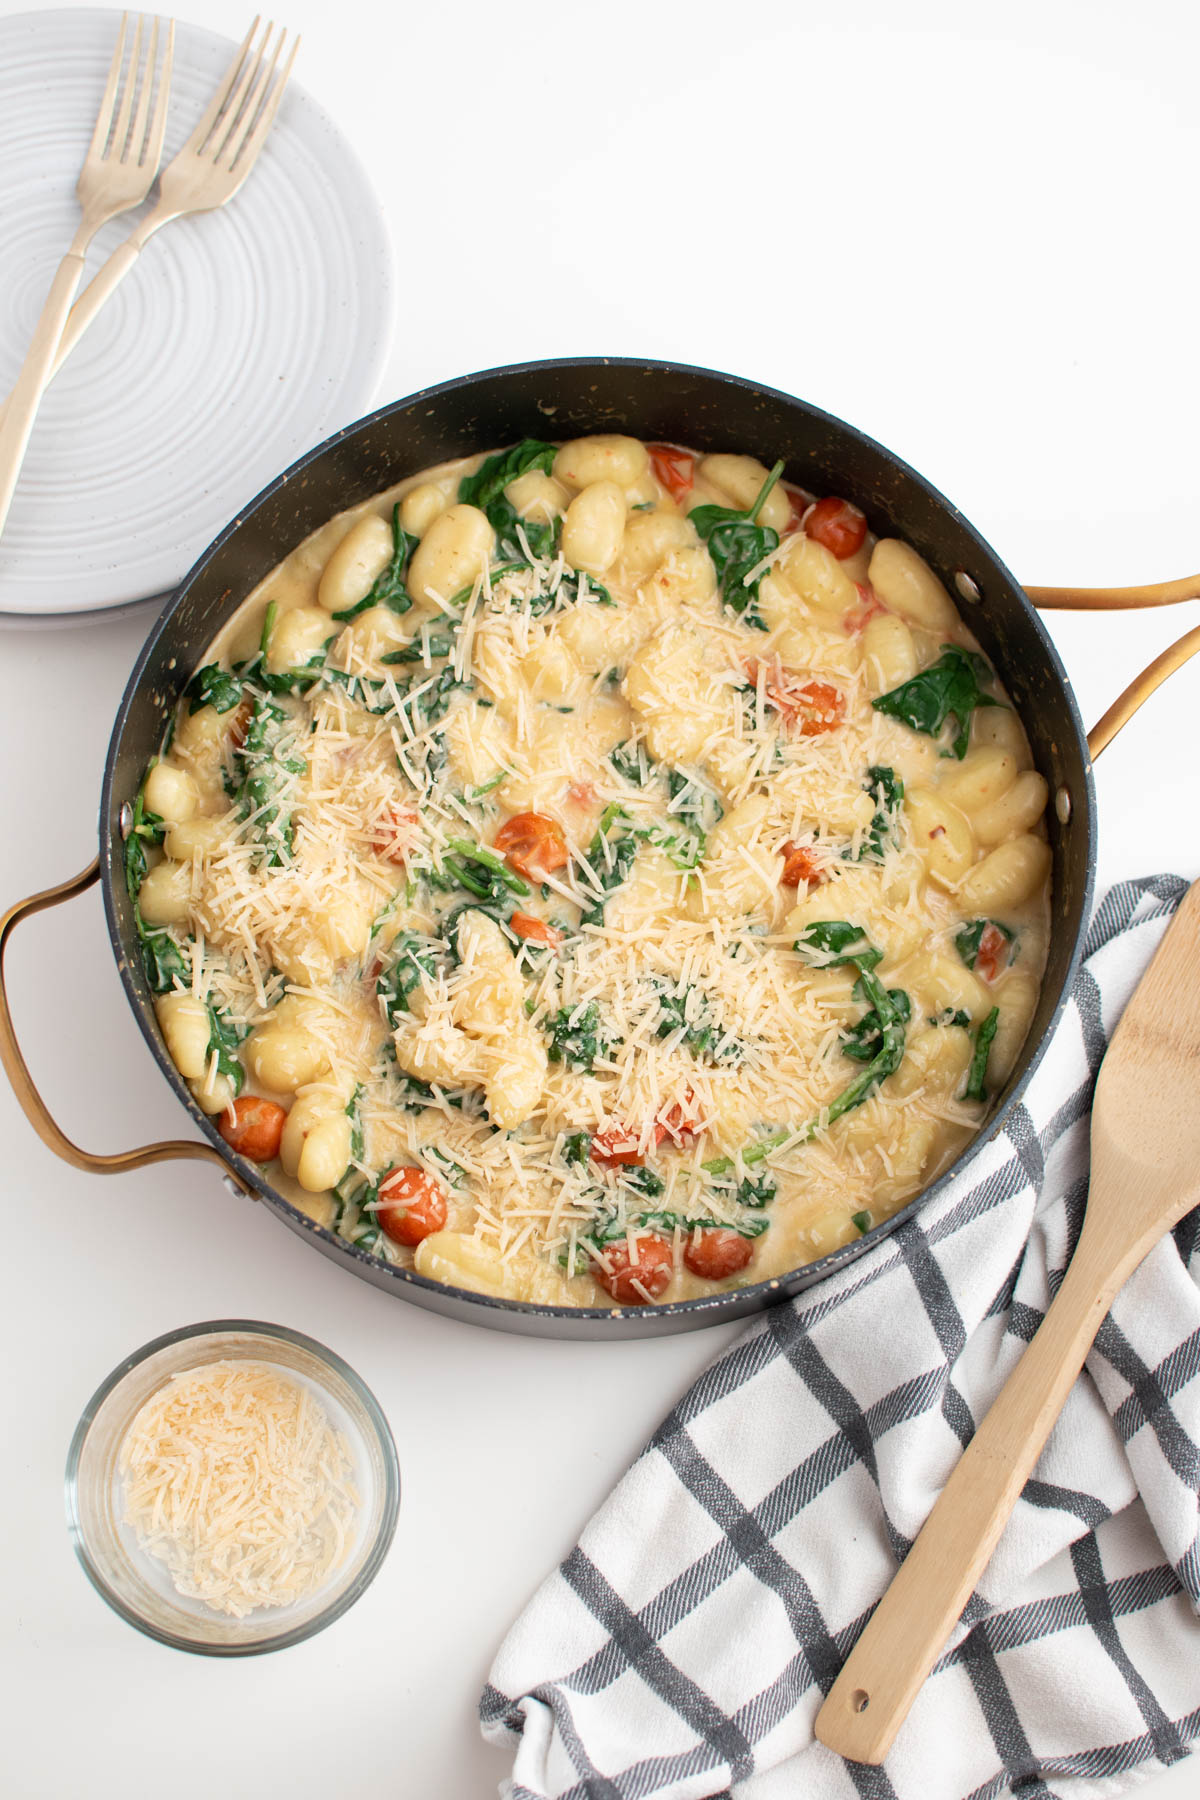 Large skillet of creamy gnocchi with tomatoes surrounding by wooden spoon and plates on white table.